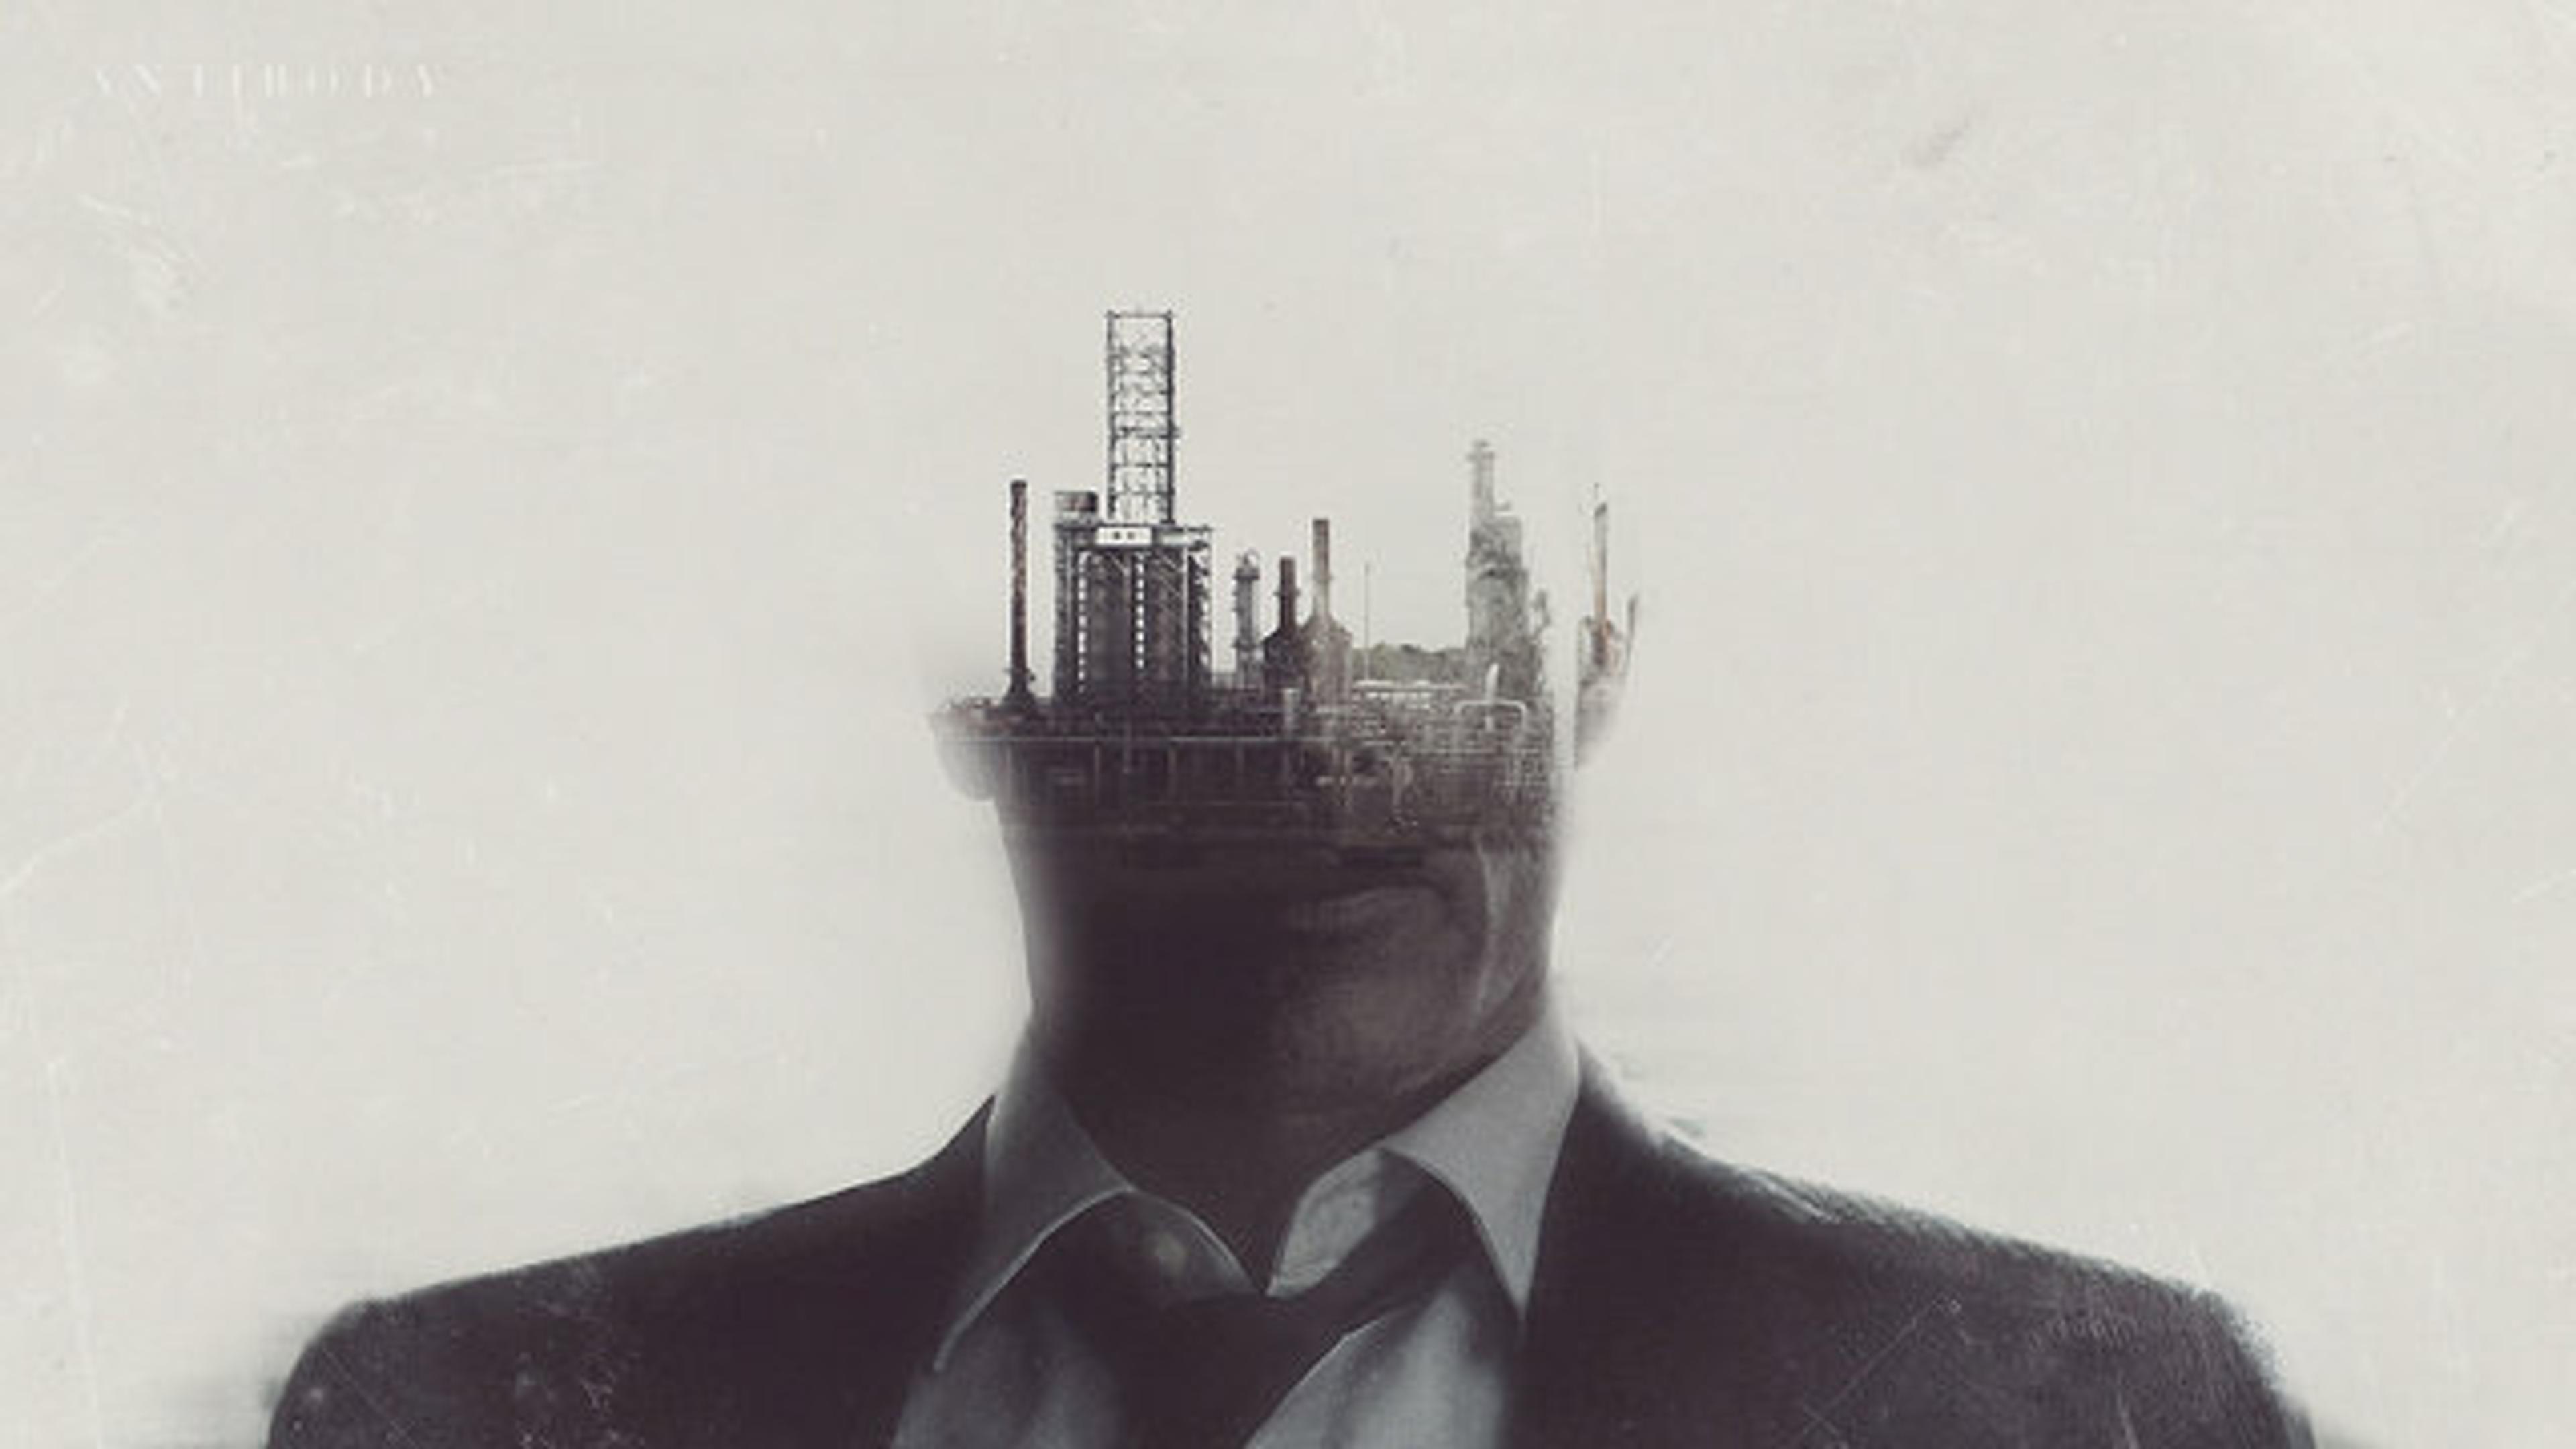 “True Detective”: Down the Bayou (Far From Any Road)